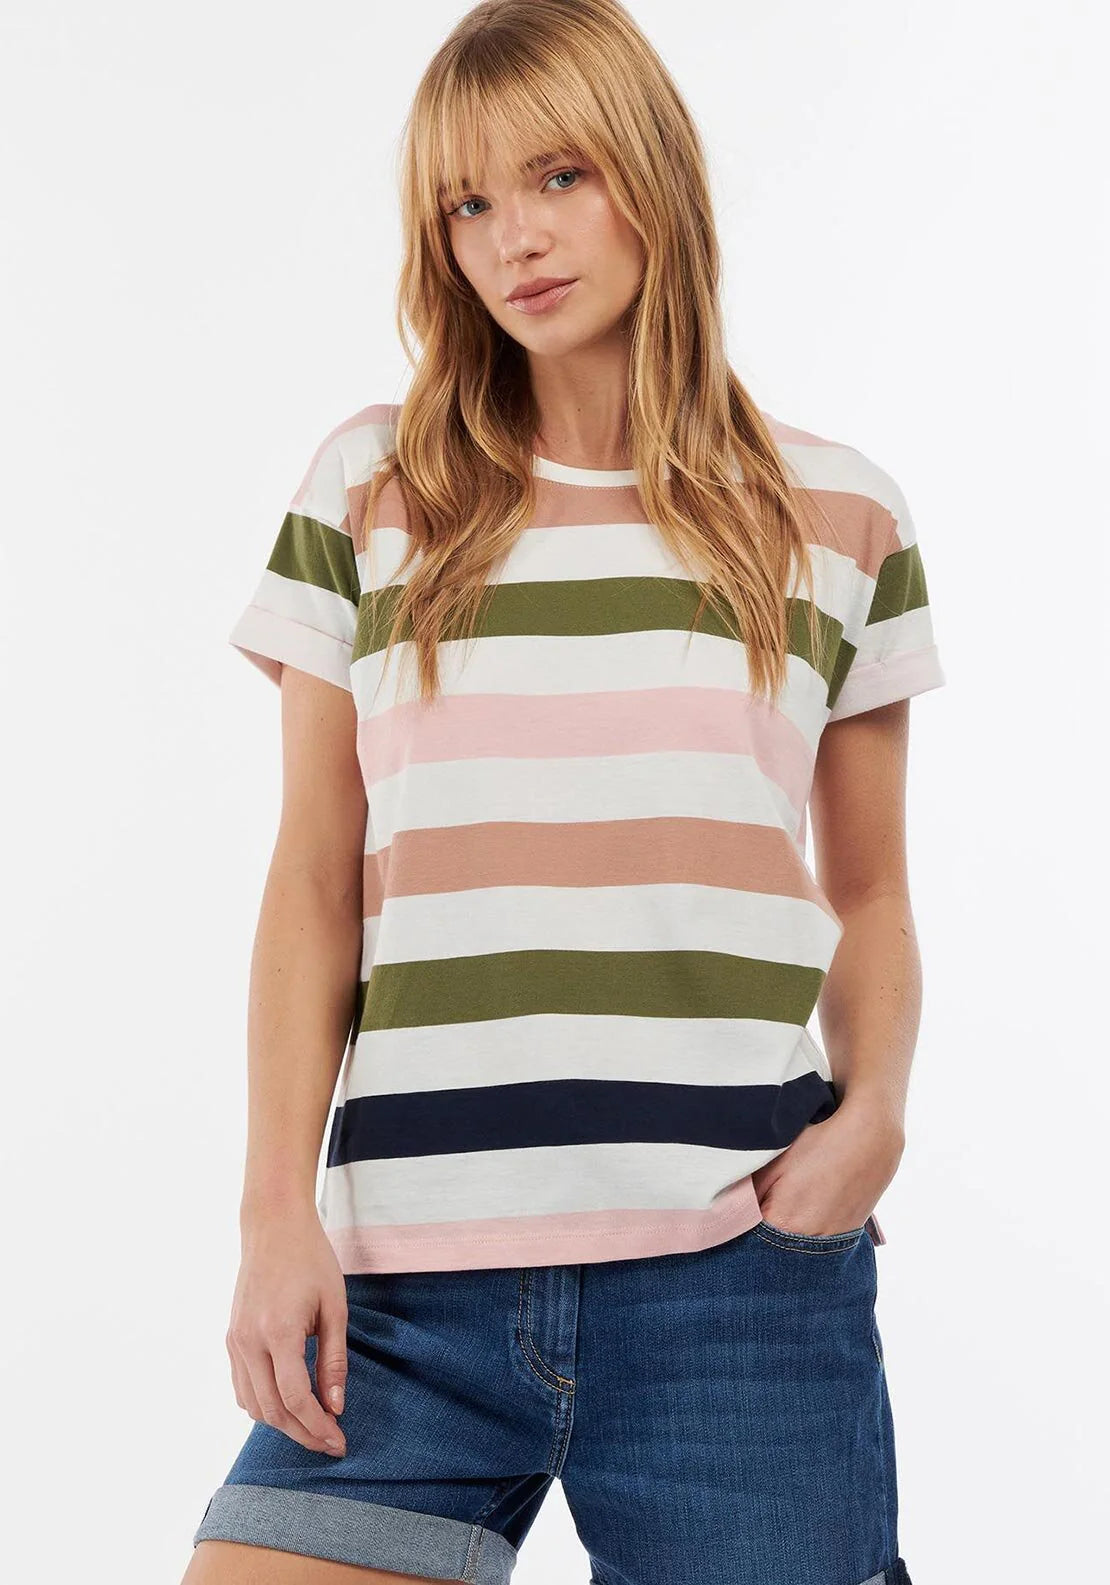 Barbout T-Shirt Lyndale